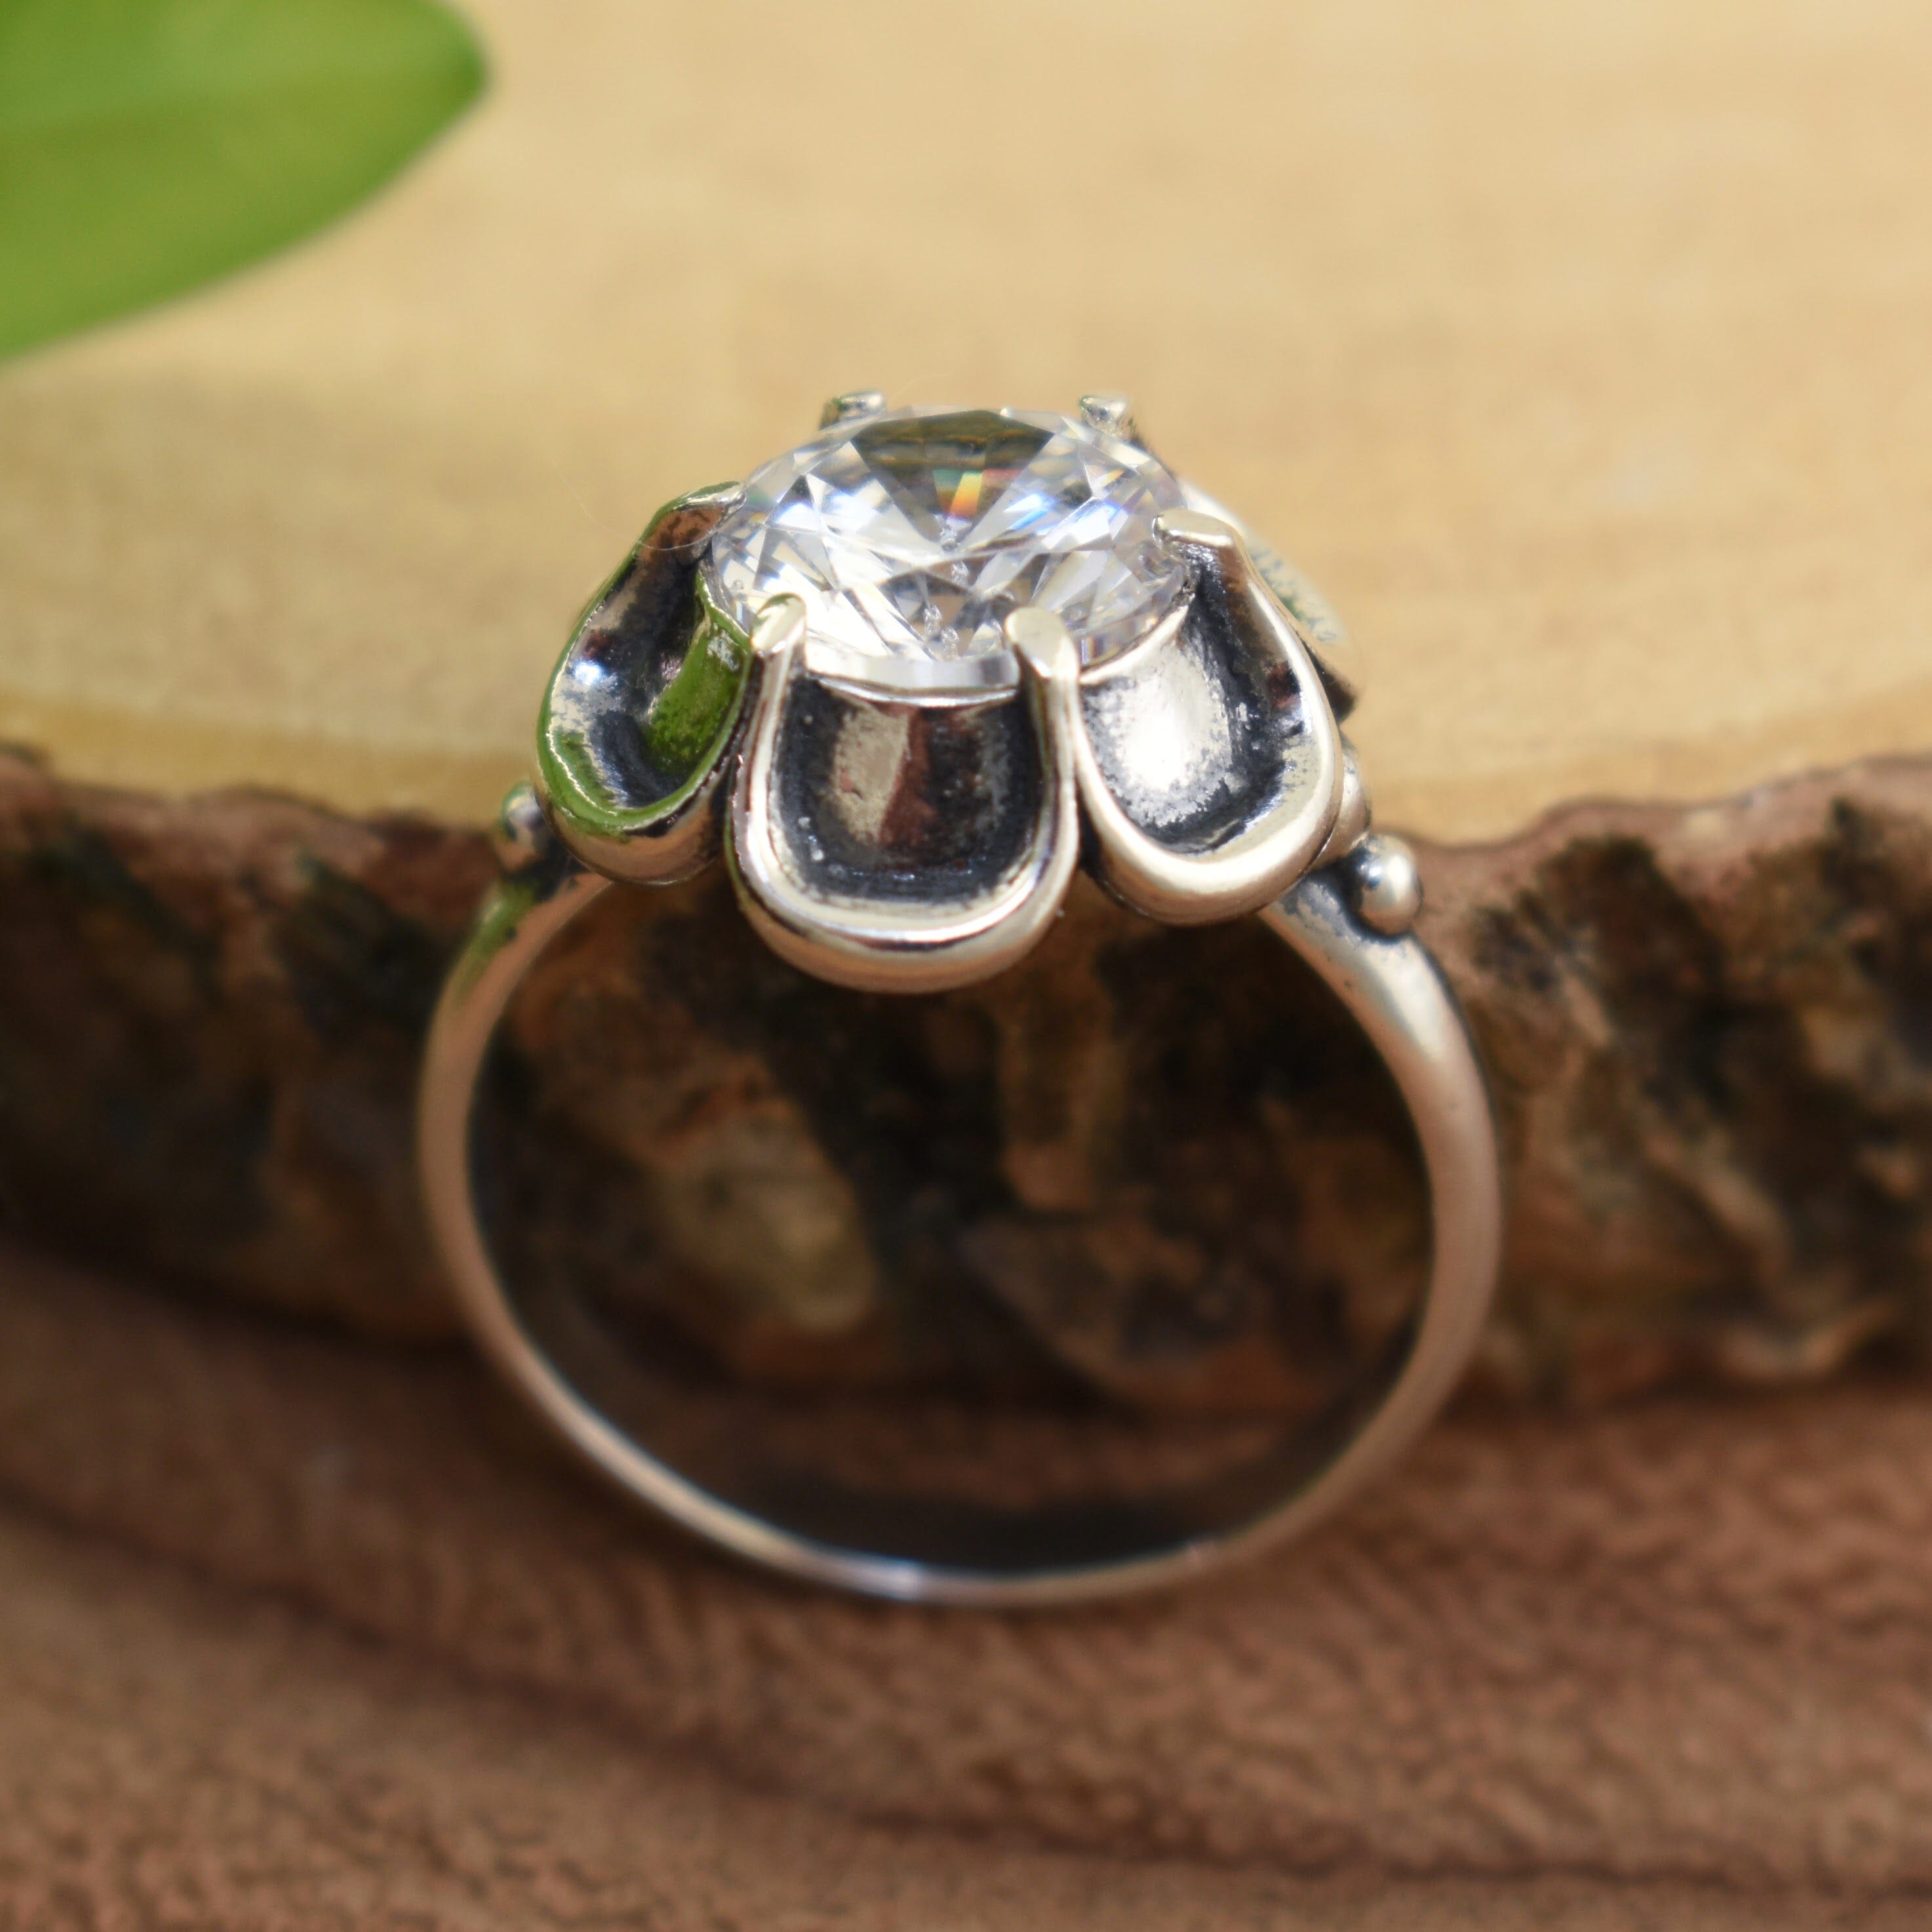 Silver flower ring with cz bling